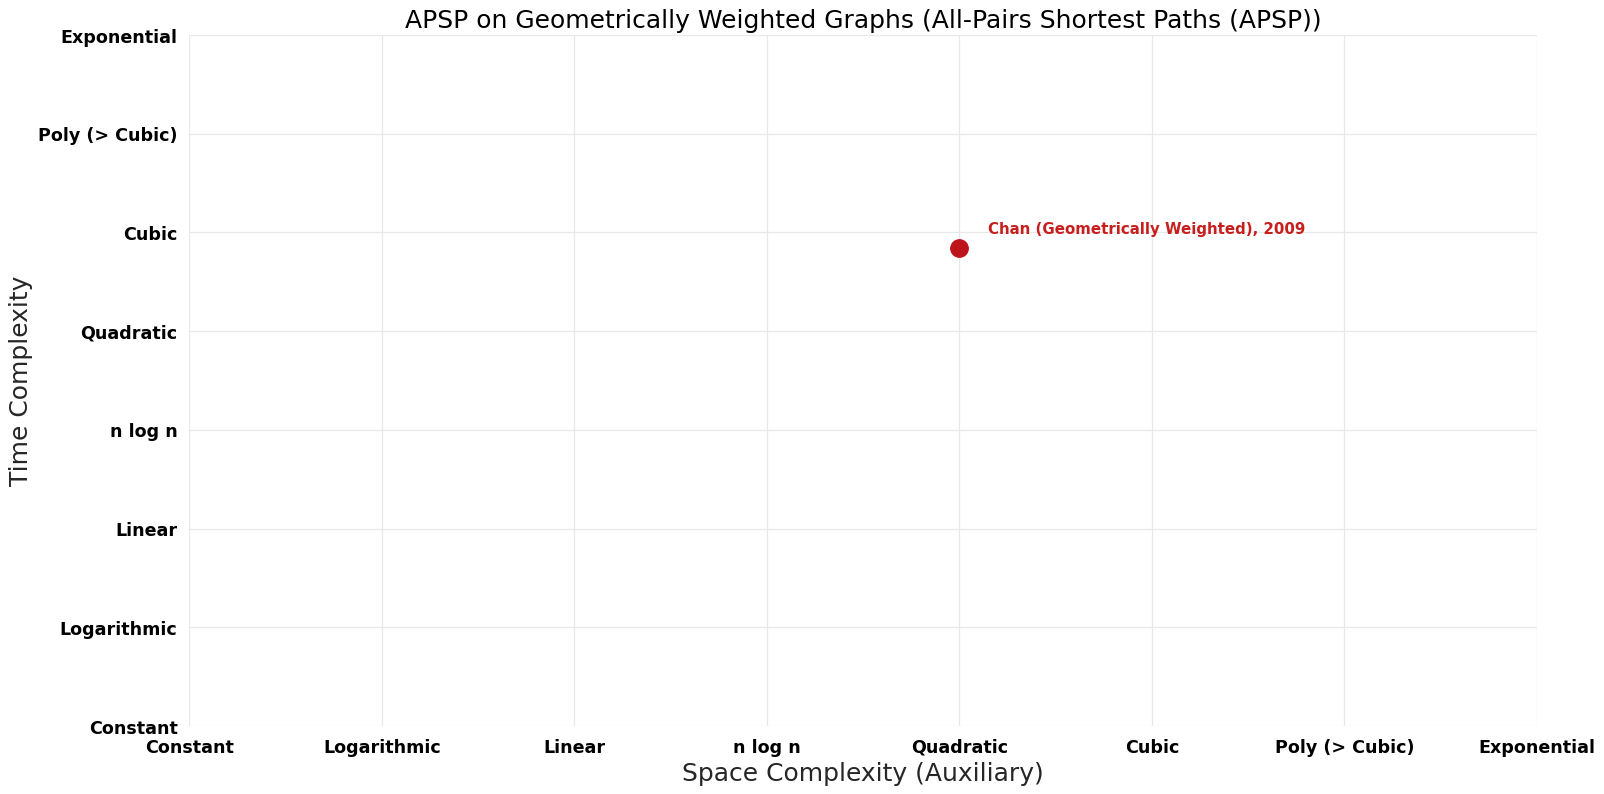 File:All-Pairs Shortest Paths (APSP) - APSP on Geometrically Weighted Graphs - Pareto Frontier.png